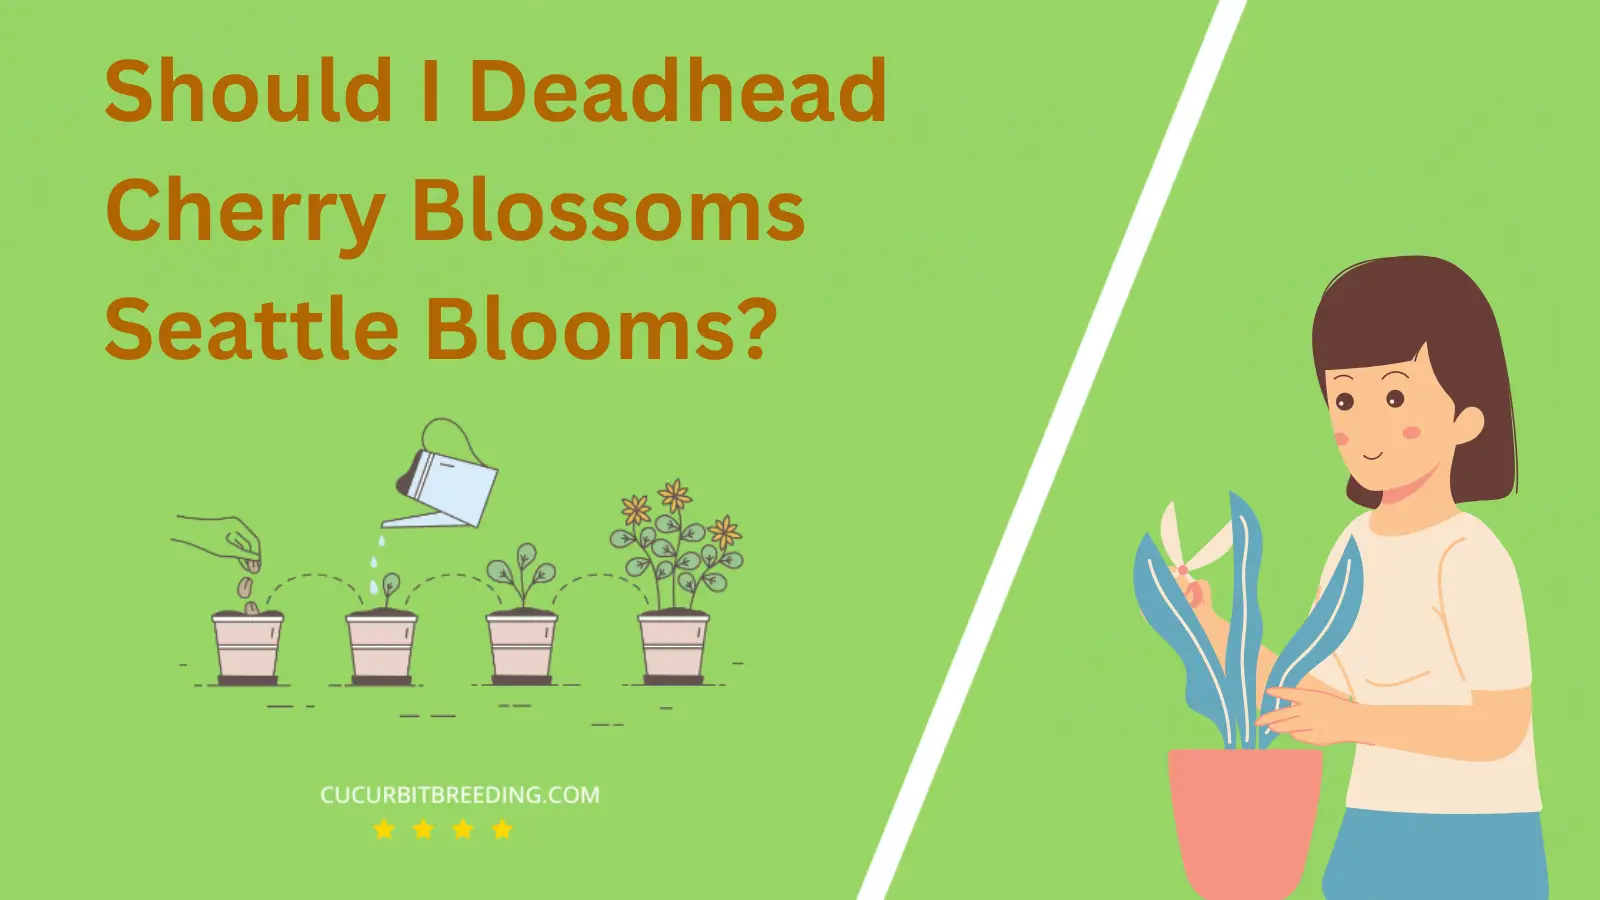 Should I Deadhead Cherry Blossoms Seattle Blooms?